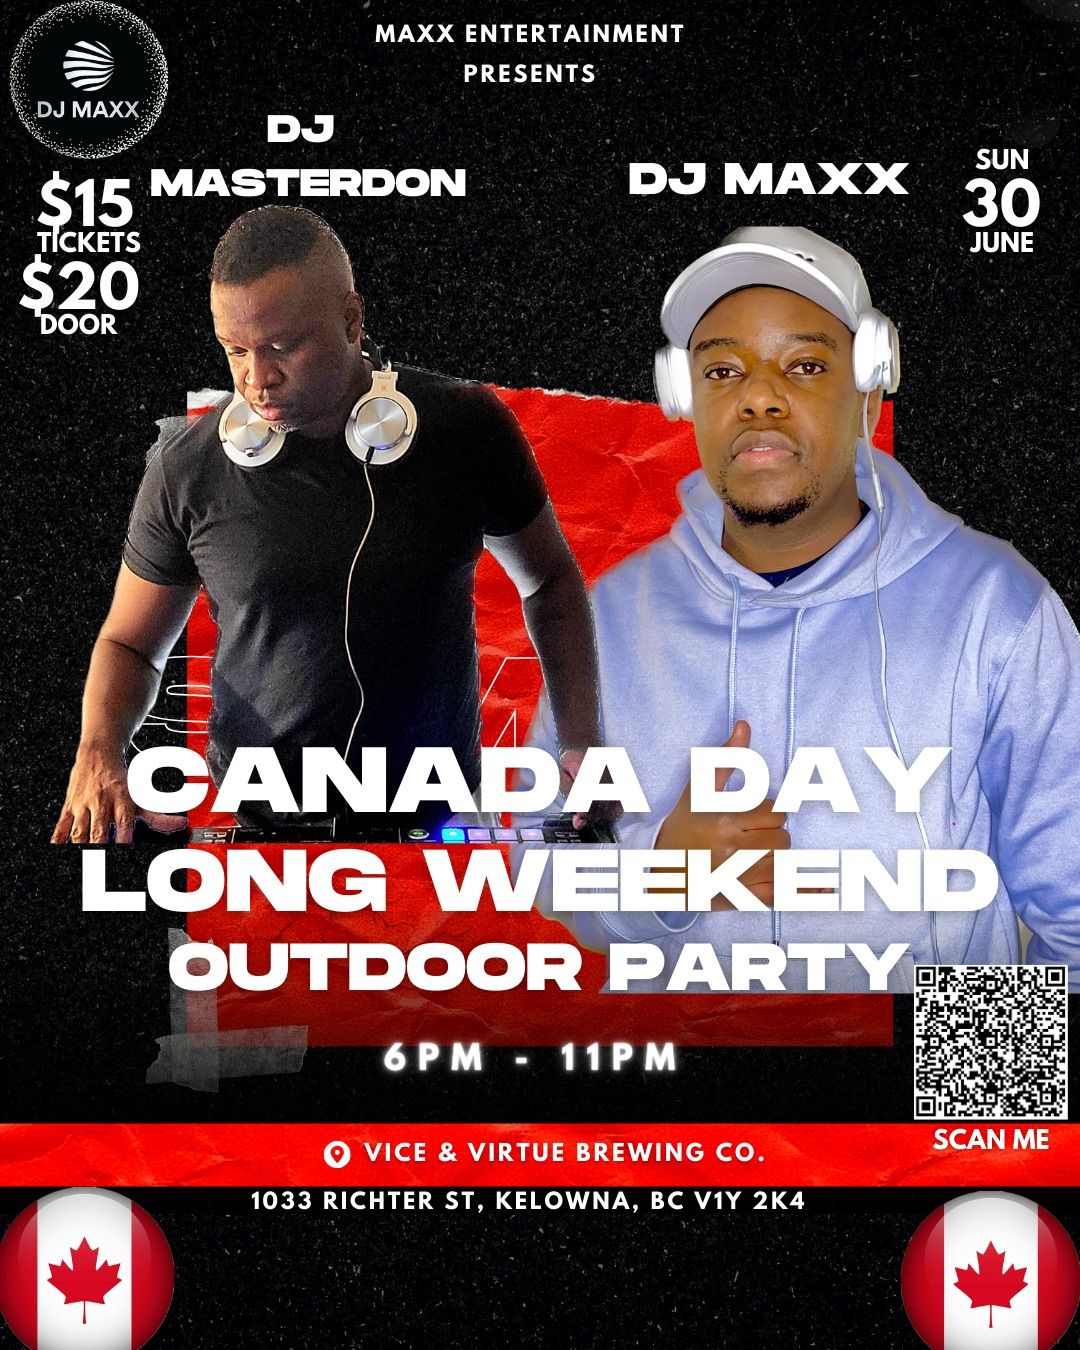 Canada Day Long weekend OutDoor Party \ufffd